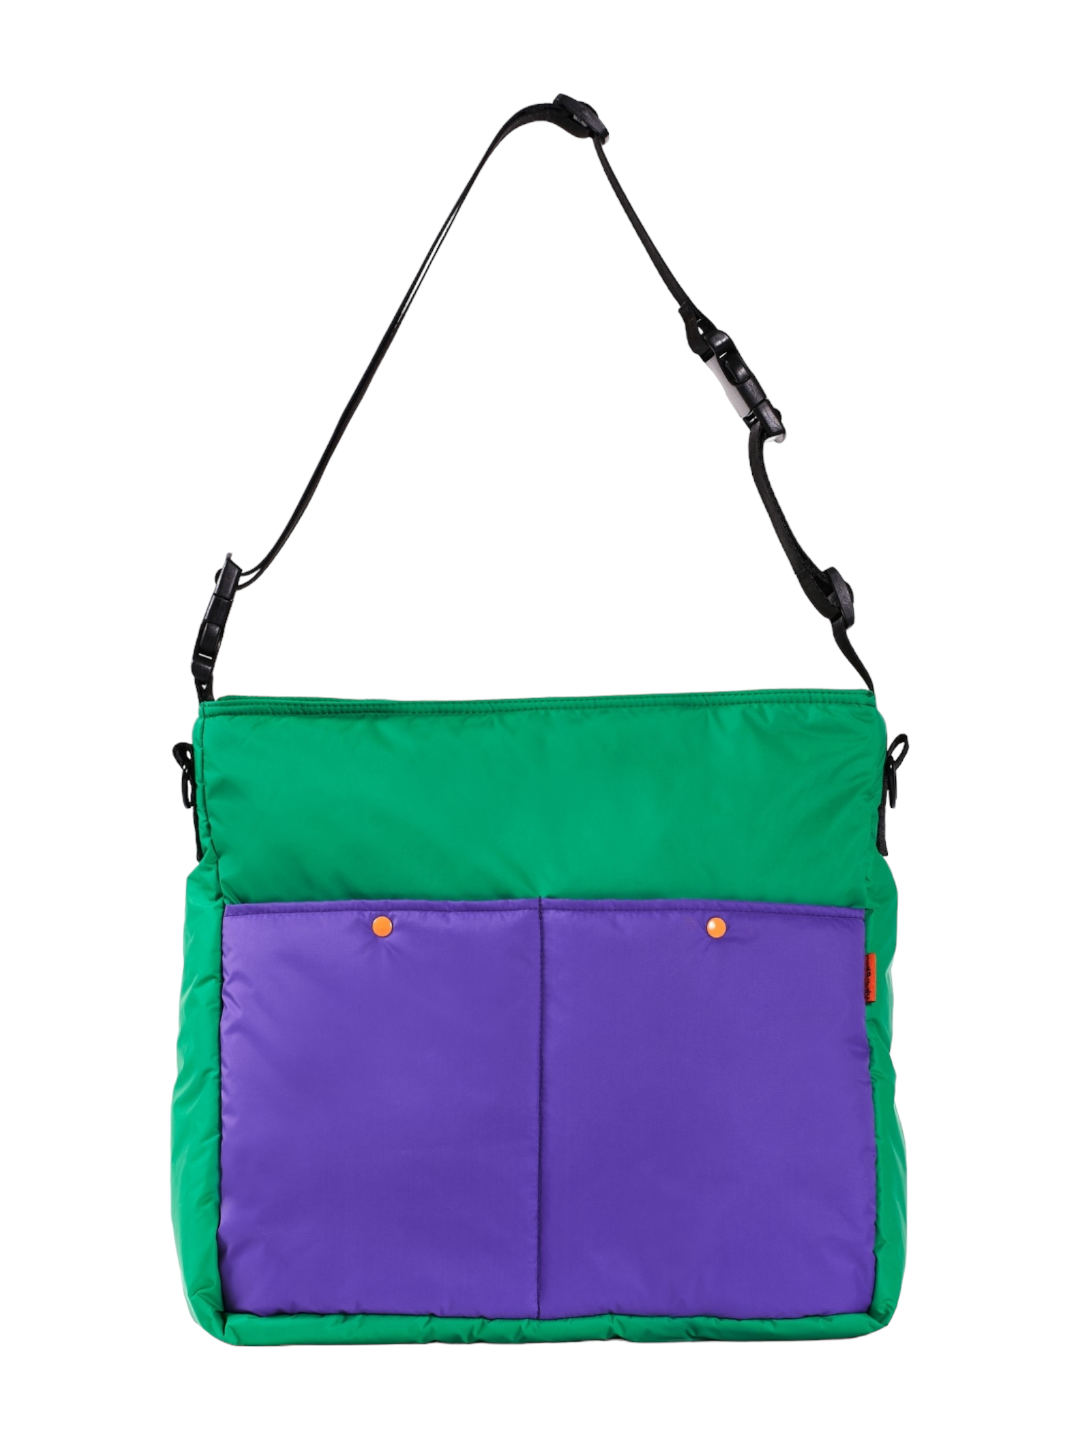 Lively Tote Bag (Green Purple)